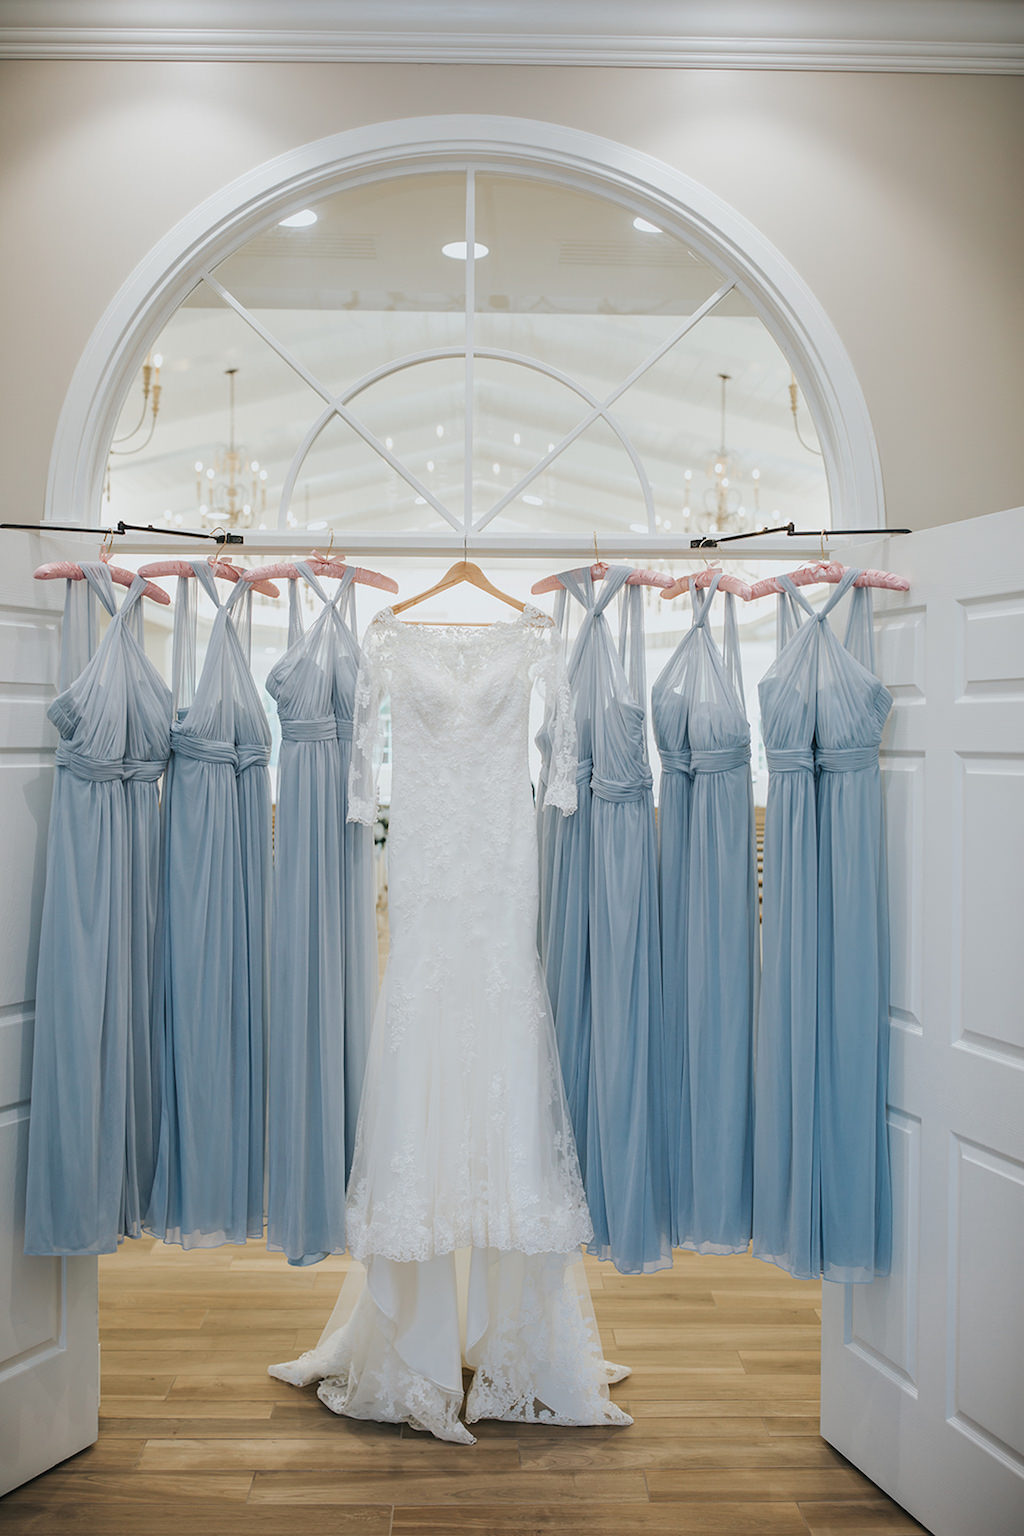 White Stella York Lace Wedding Dress with Long Sleeves Hanging on Wooden Hanger in Venue and Light Blue/Dusty Blue Chiffon Bridesmaid Dresses Hanging in Venue